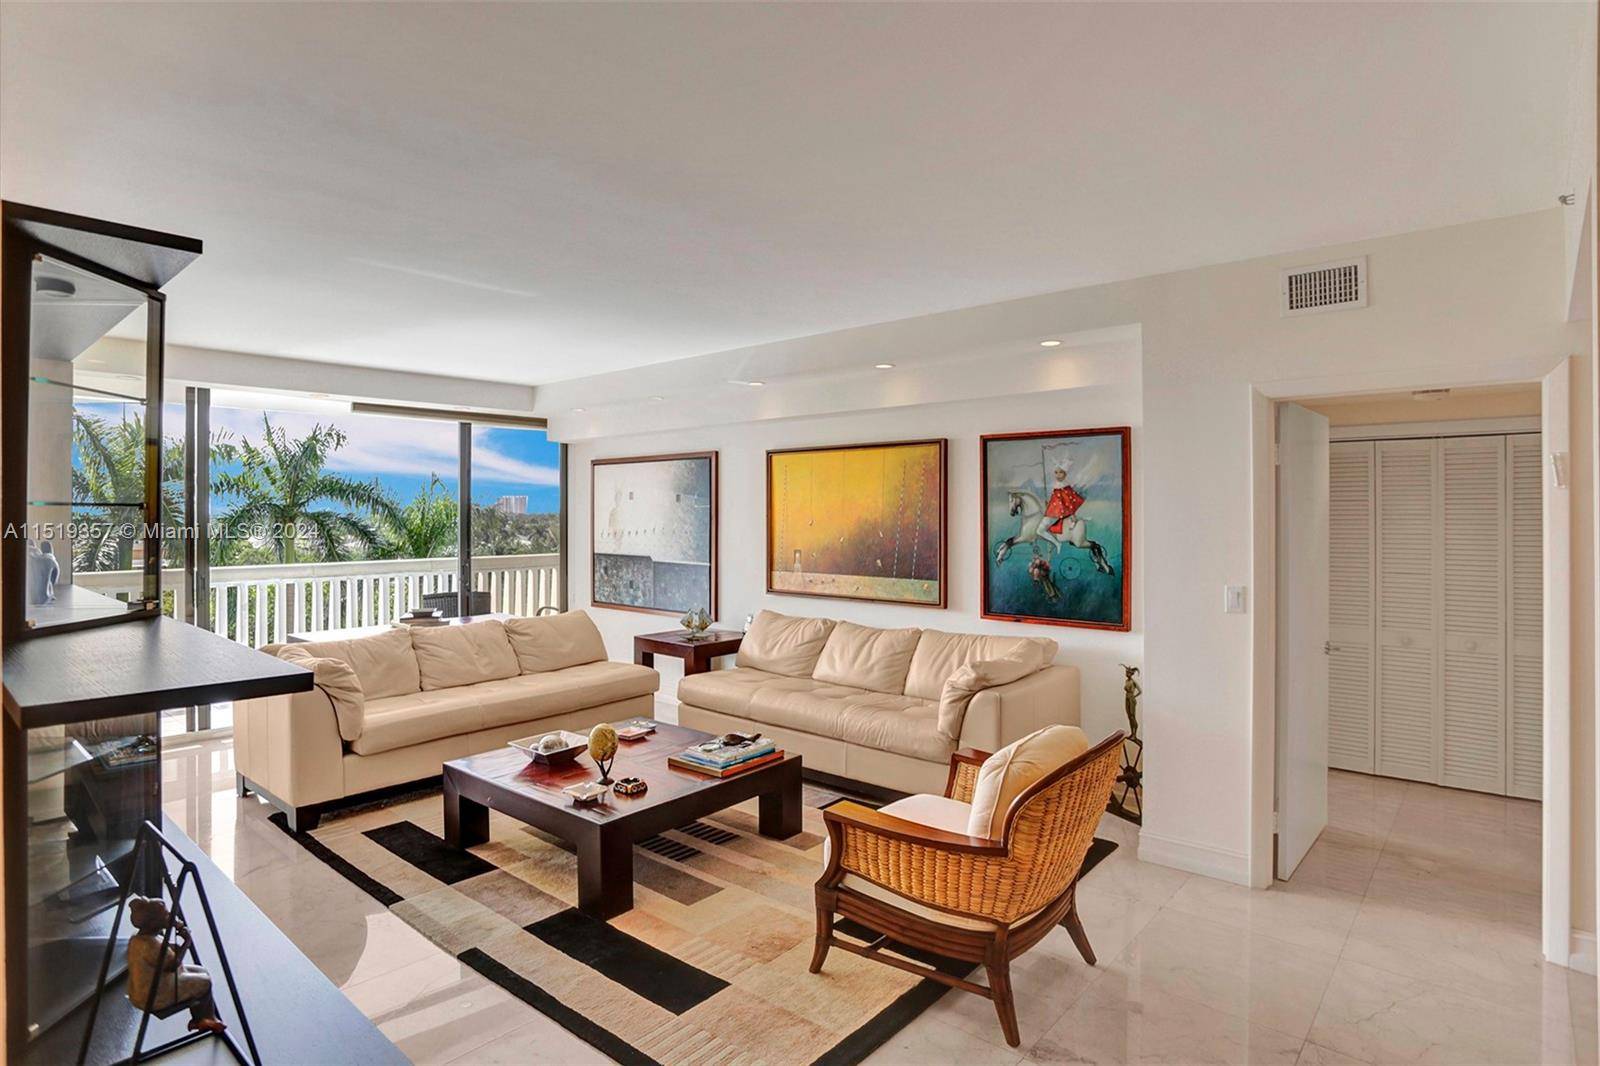 A remarkable condominium at Williams Island, positioned on the 5th floor with 2 bedrooms and 2 bathrooms.